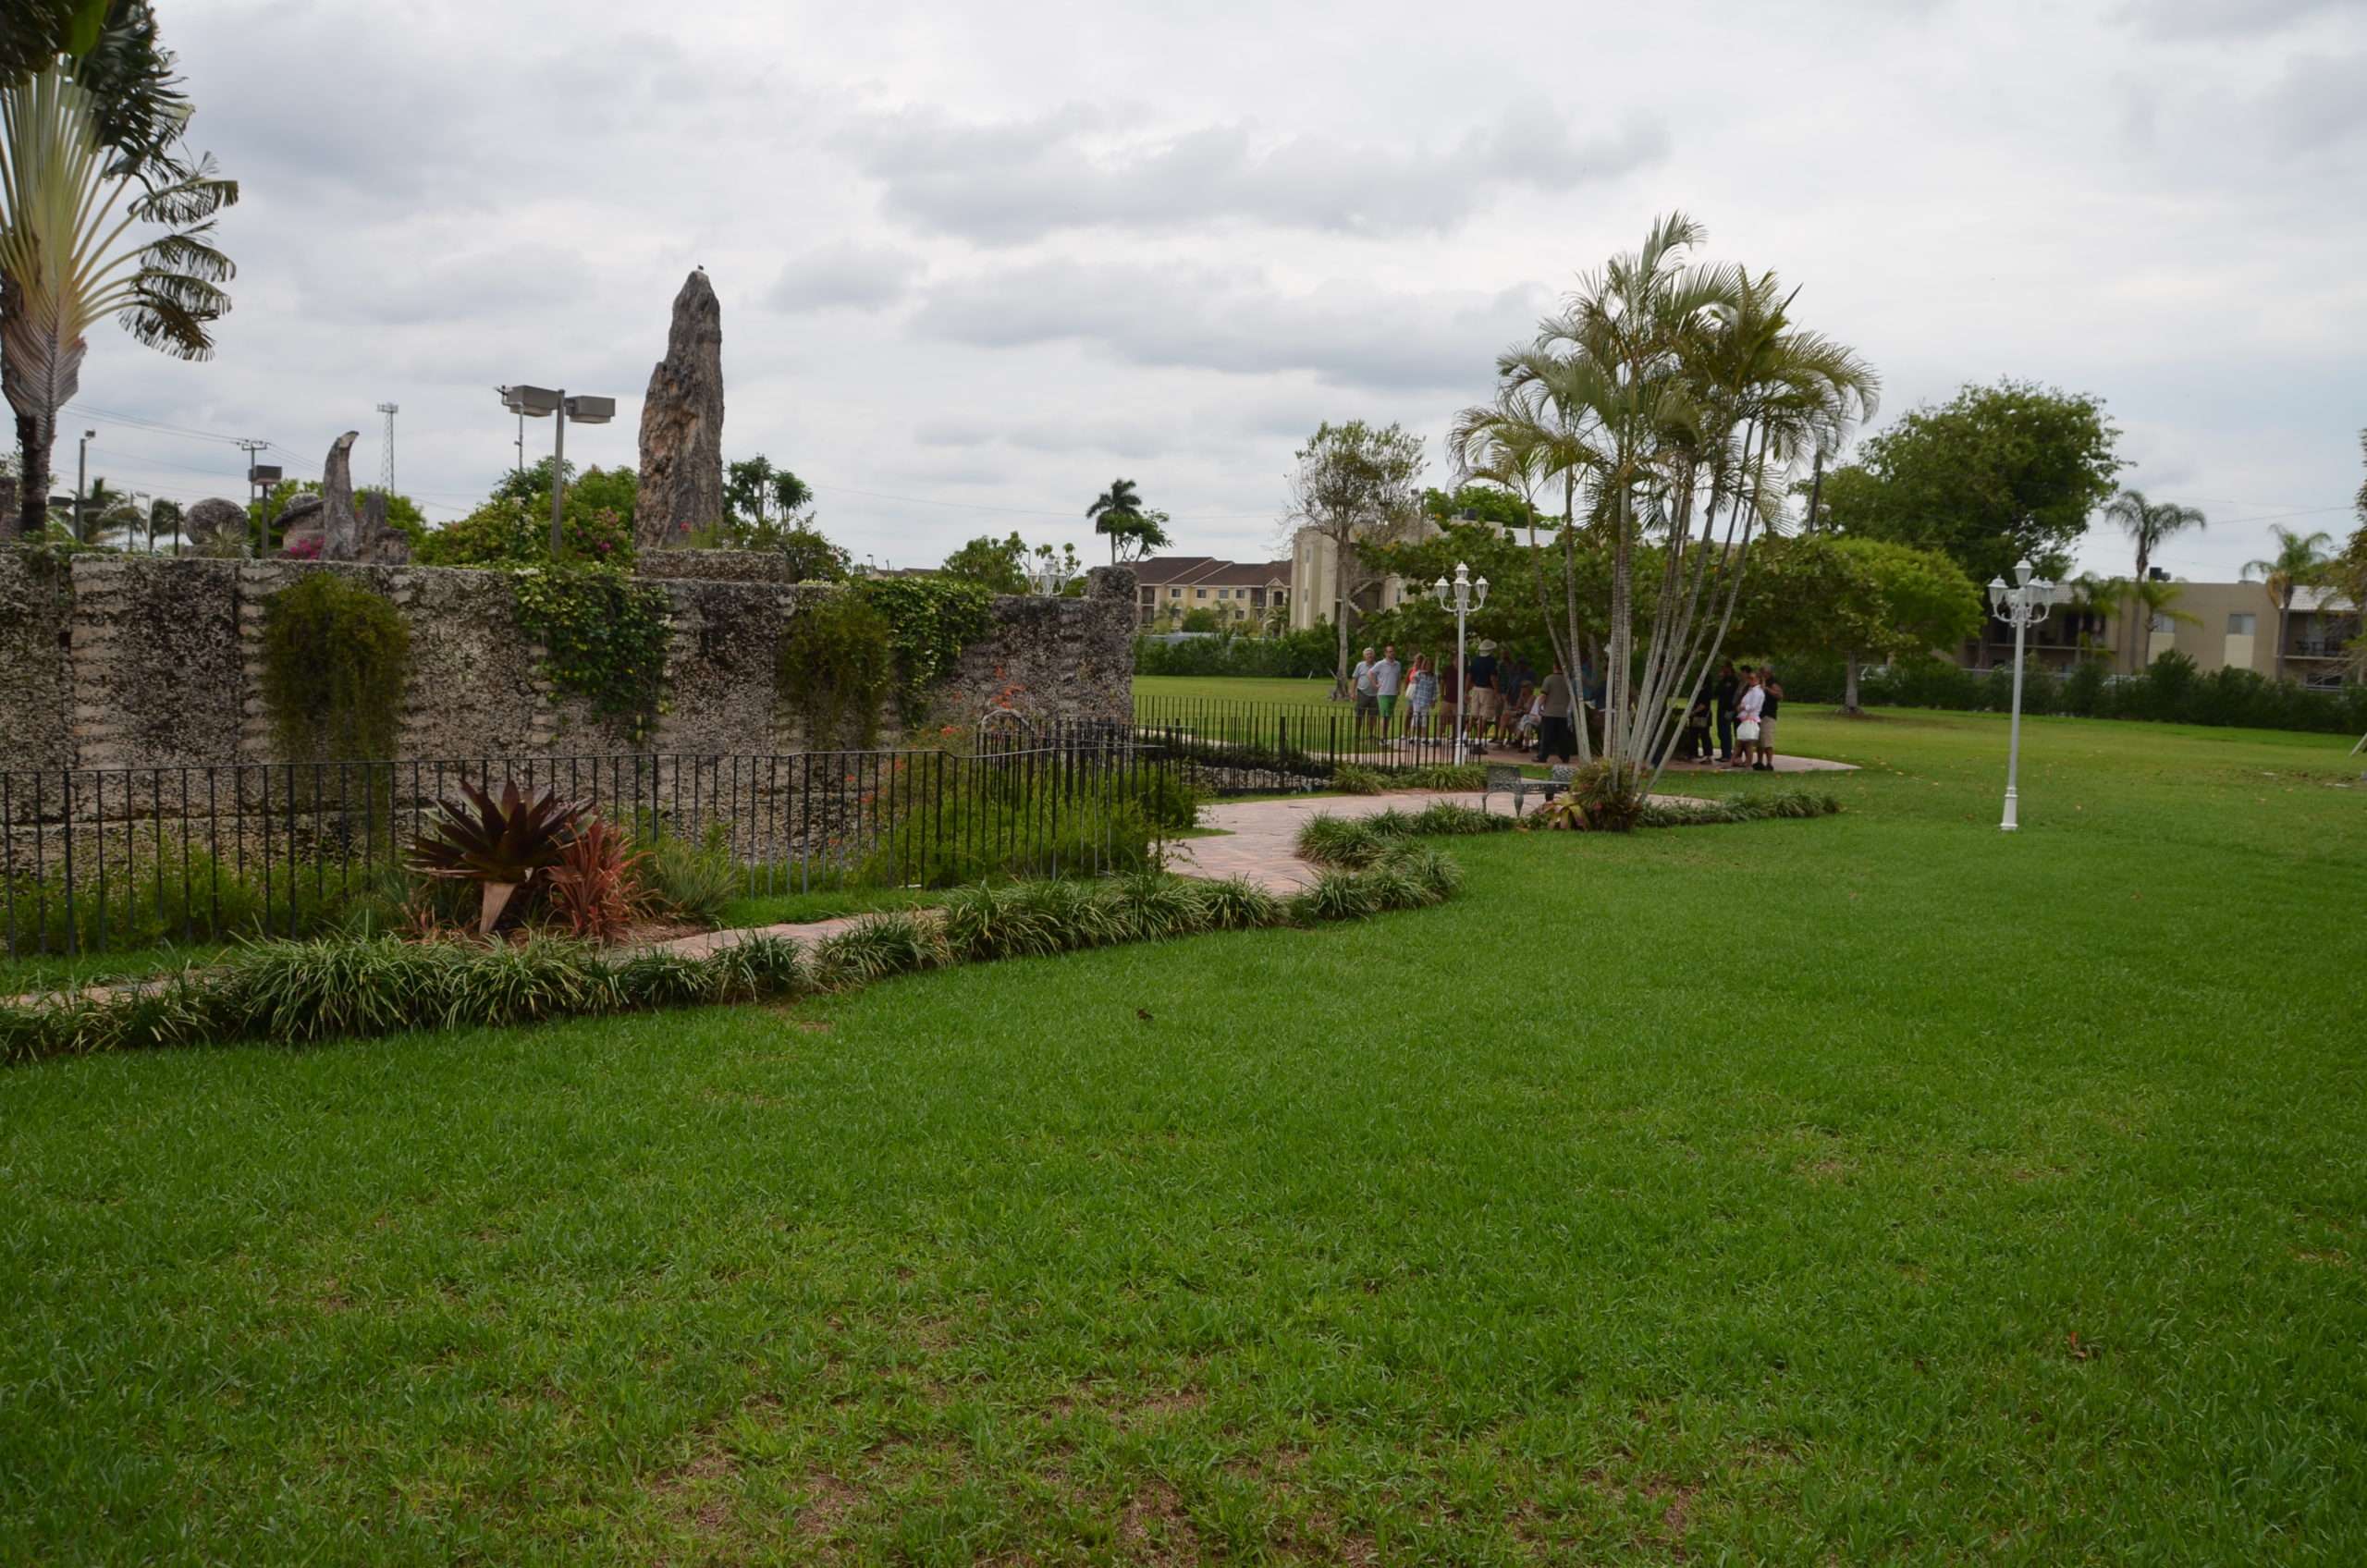 Coral Castle: Megalithic Mystery or Romantic Testimonial? 5